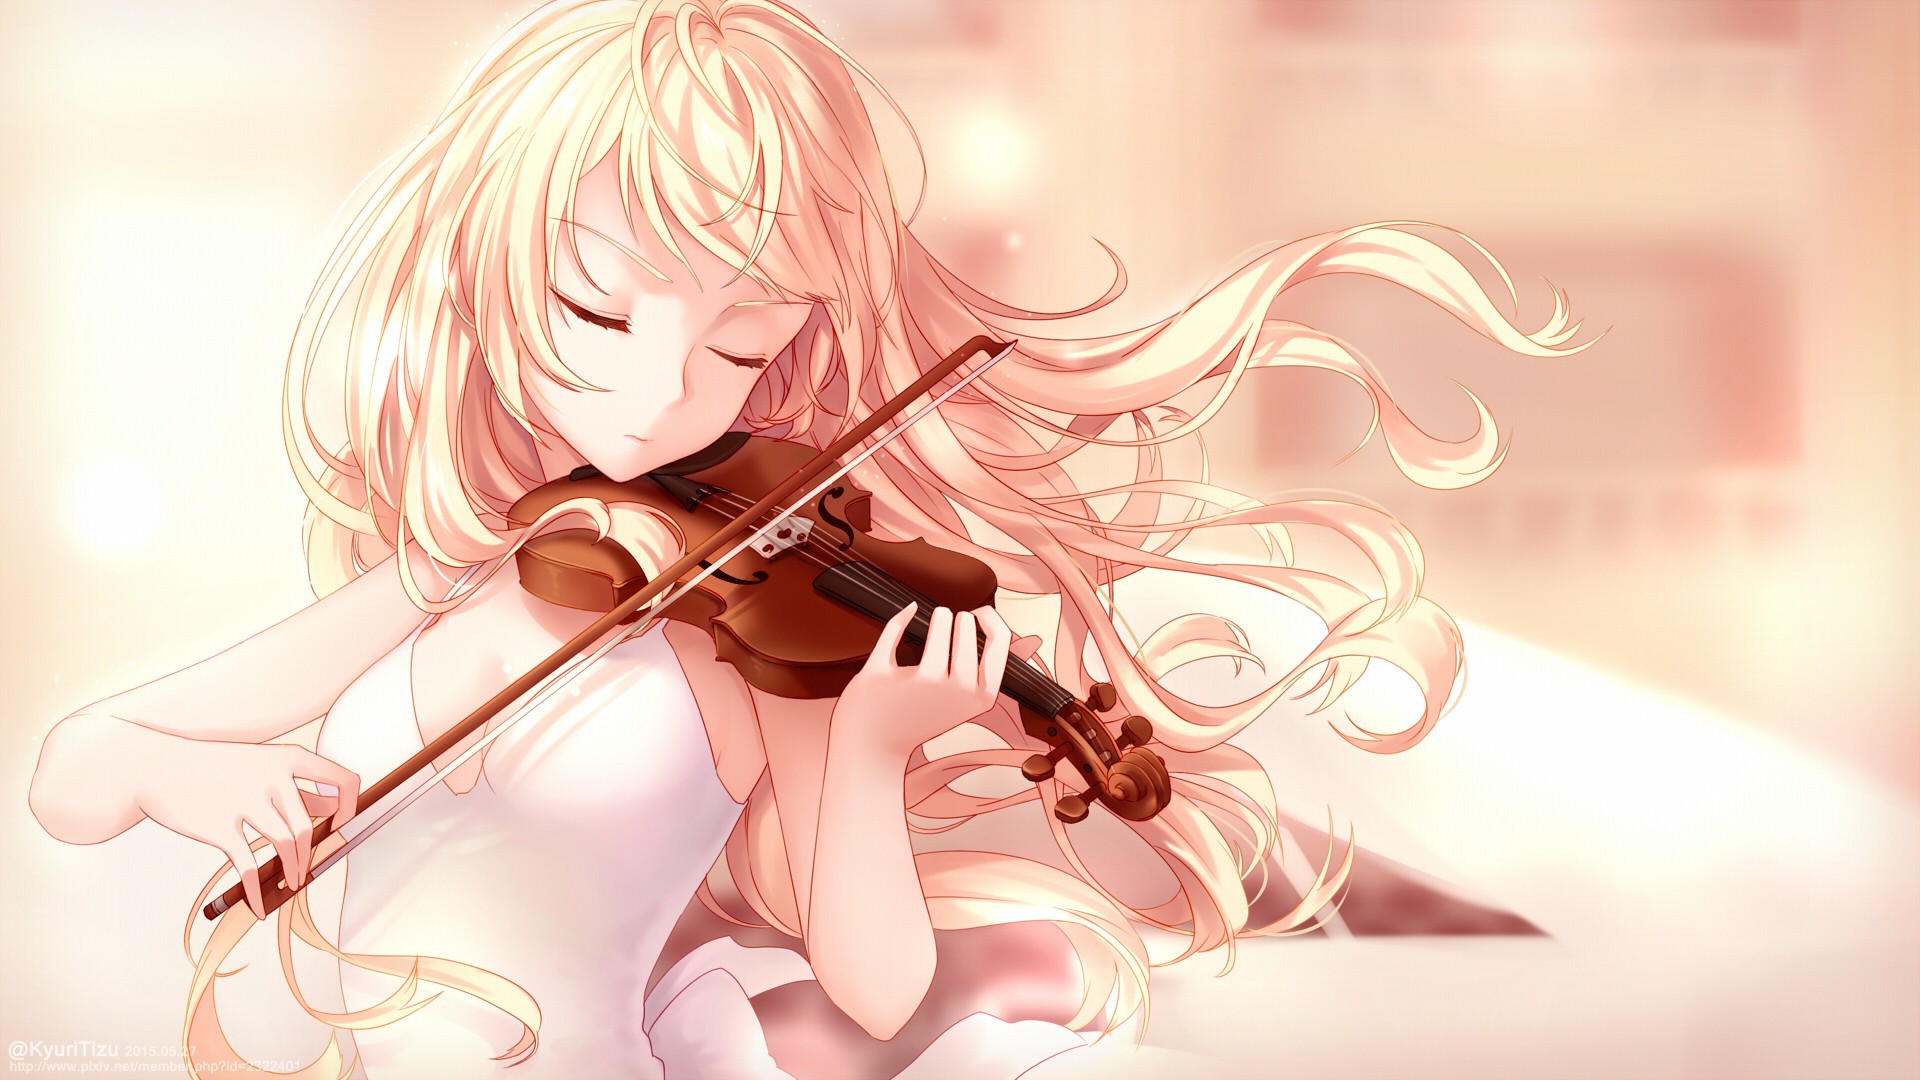 Epic Anime Opening on Violin - YouTube